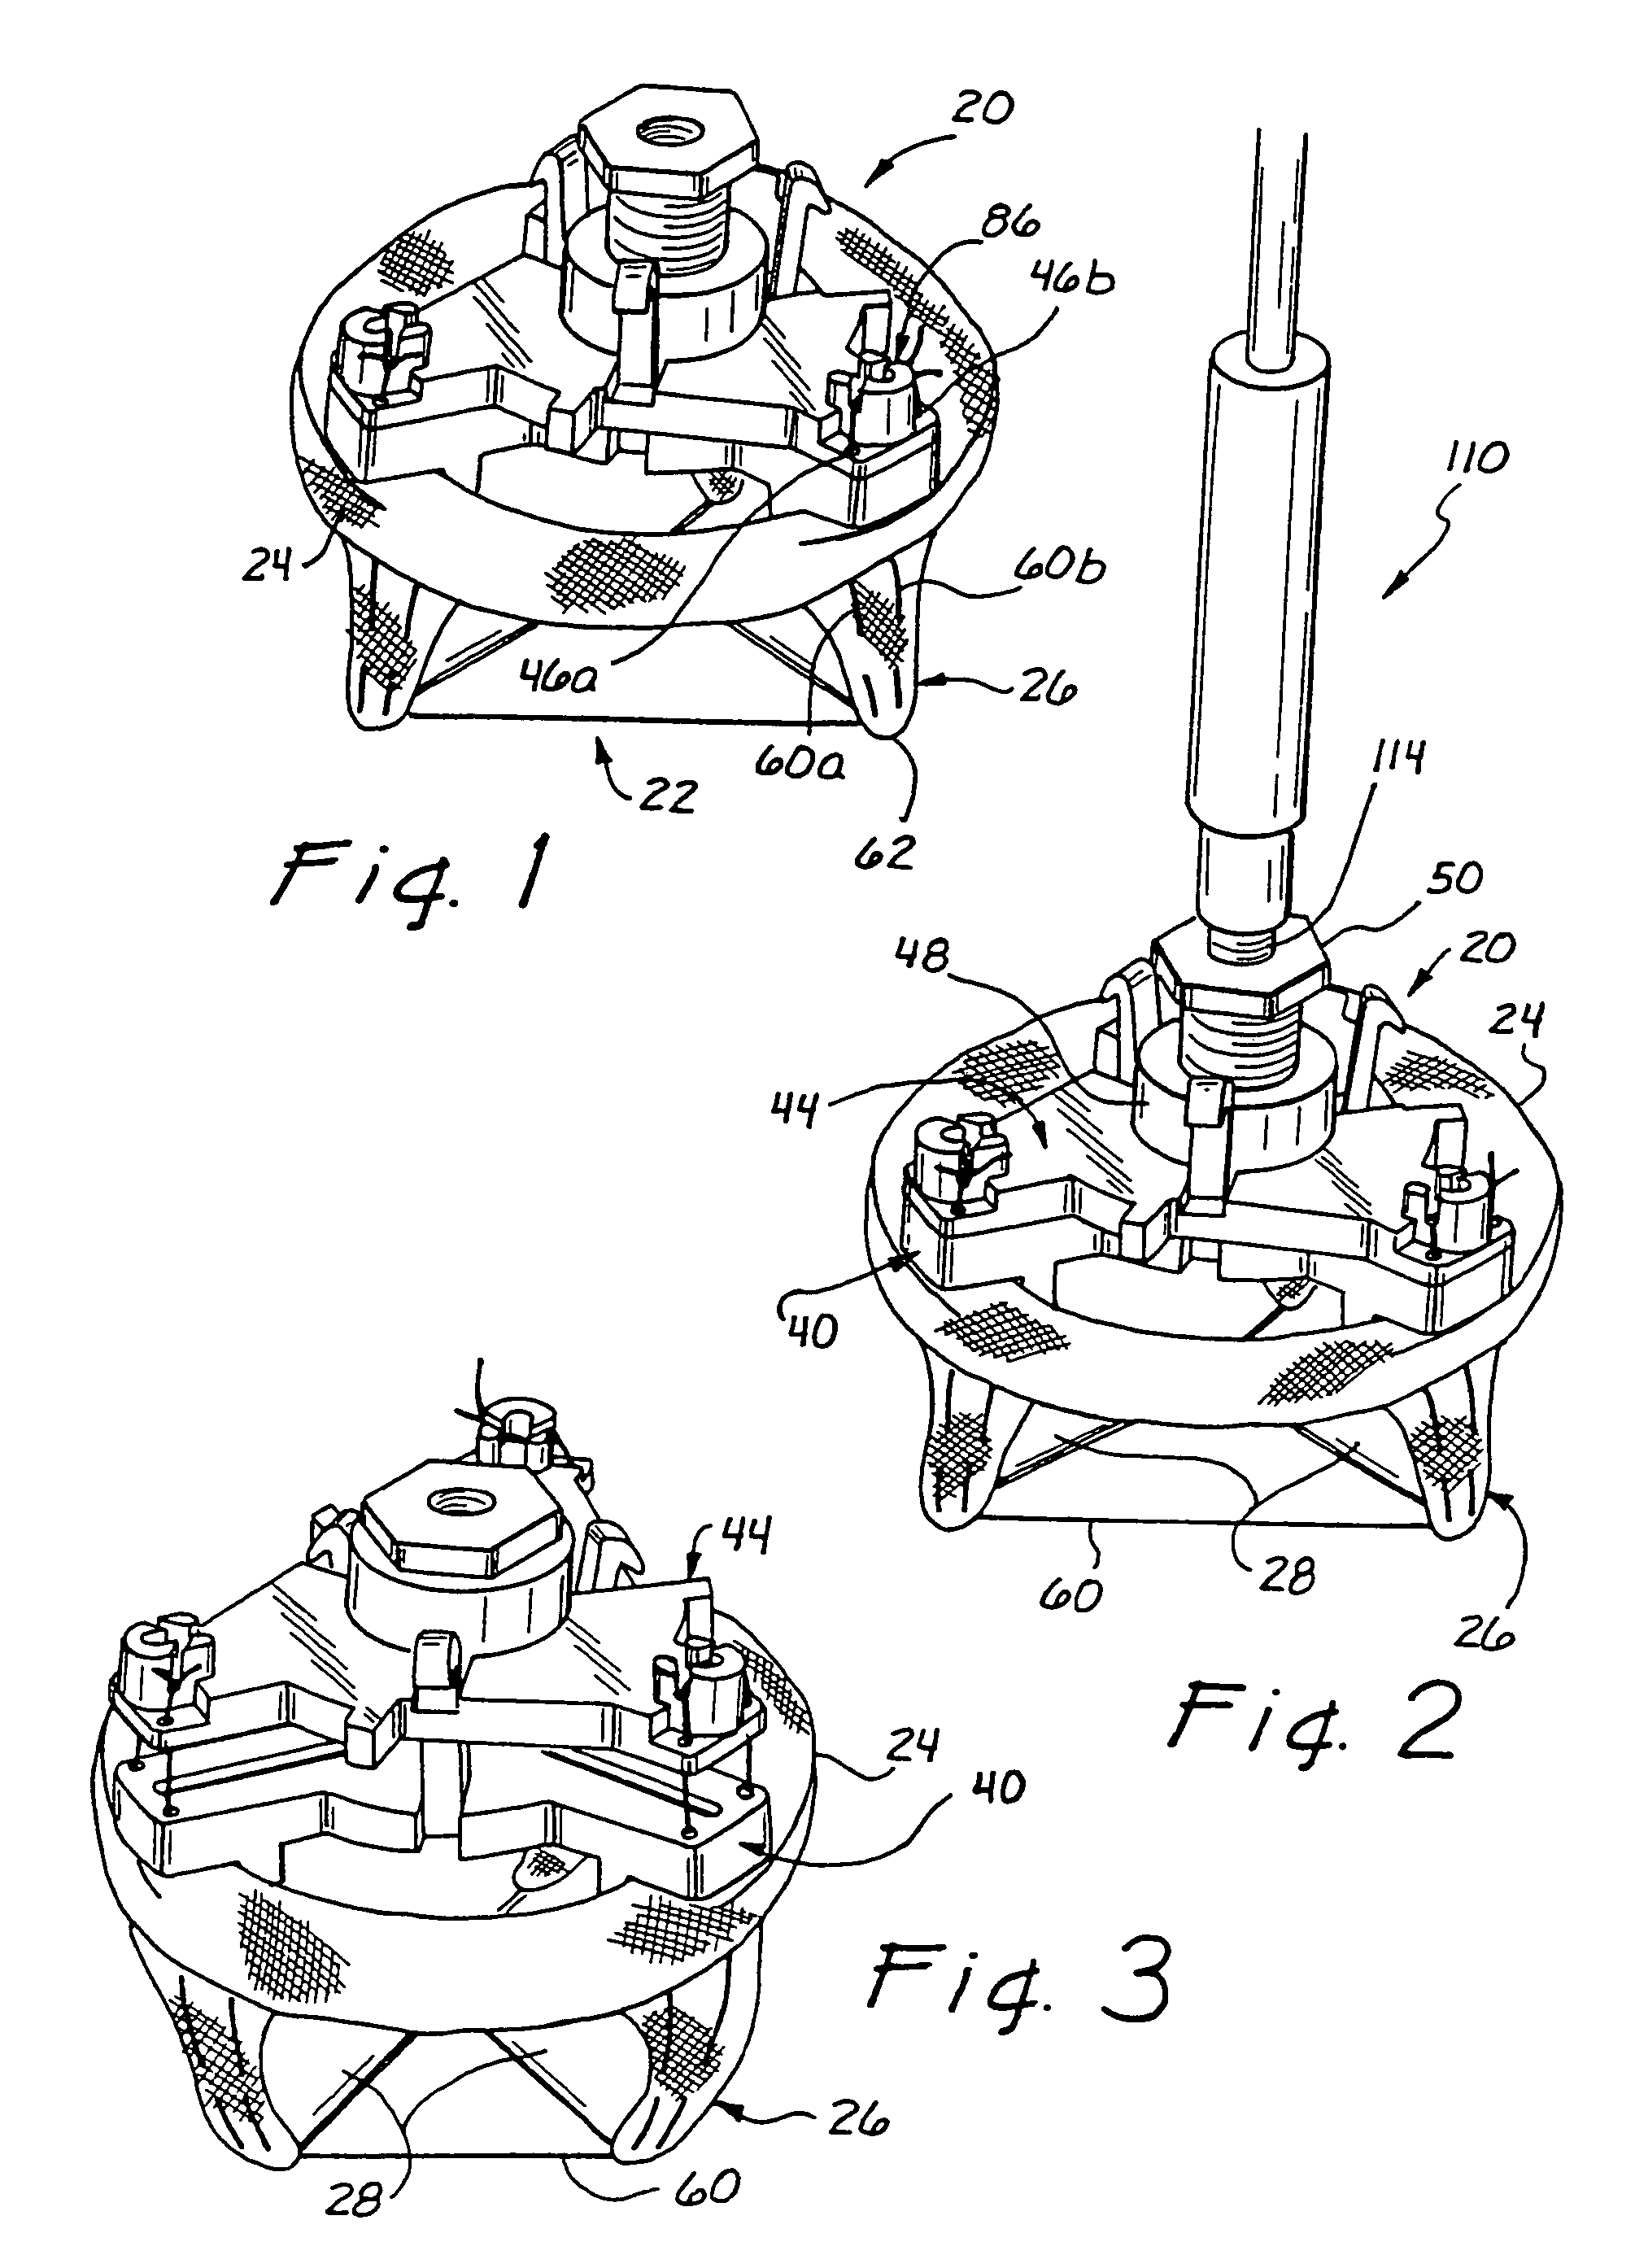 Heart valve holders and handling clips therefor